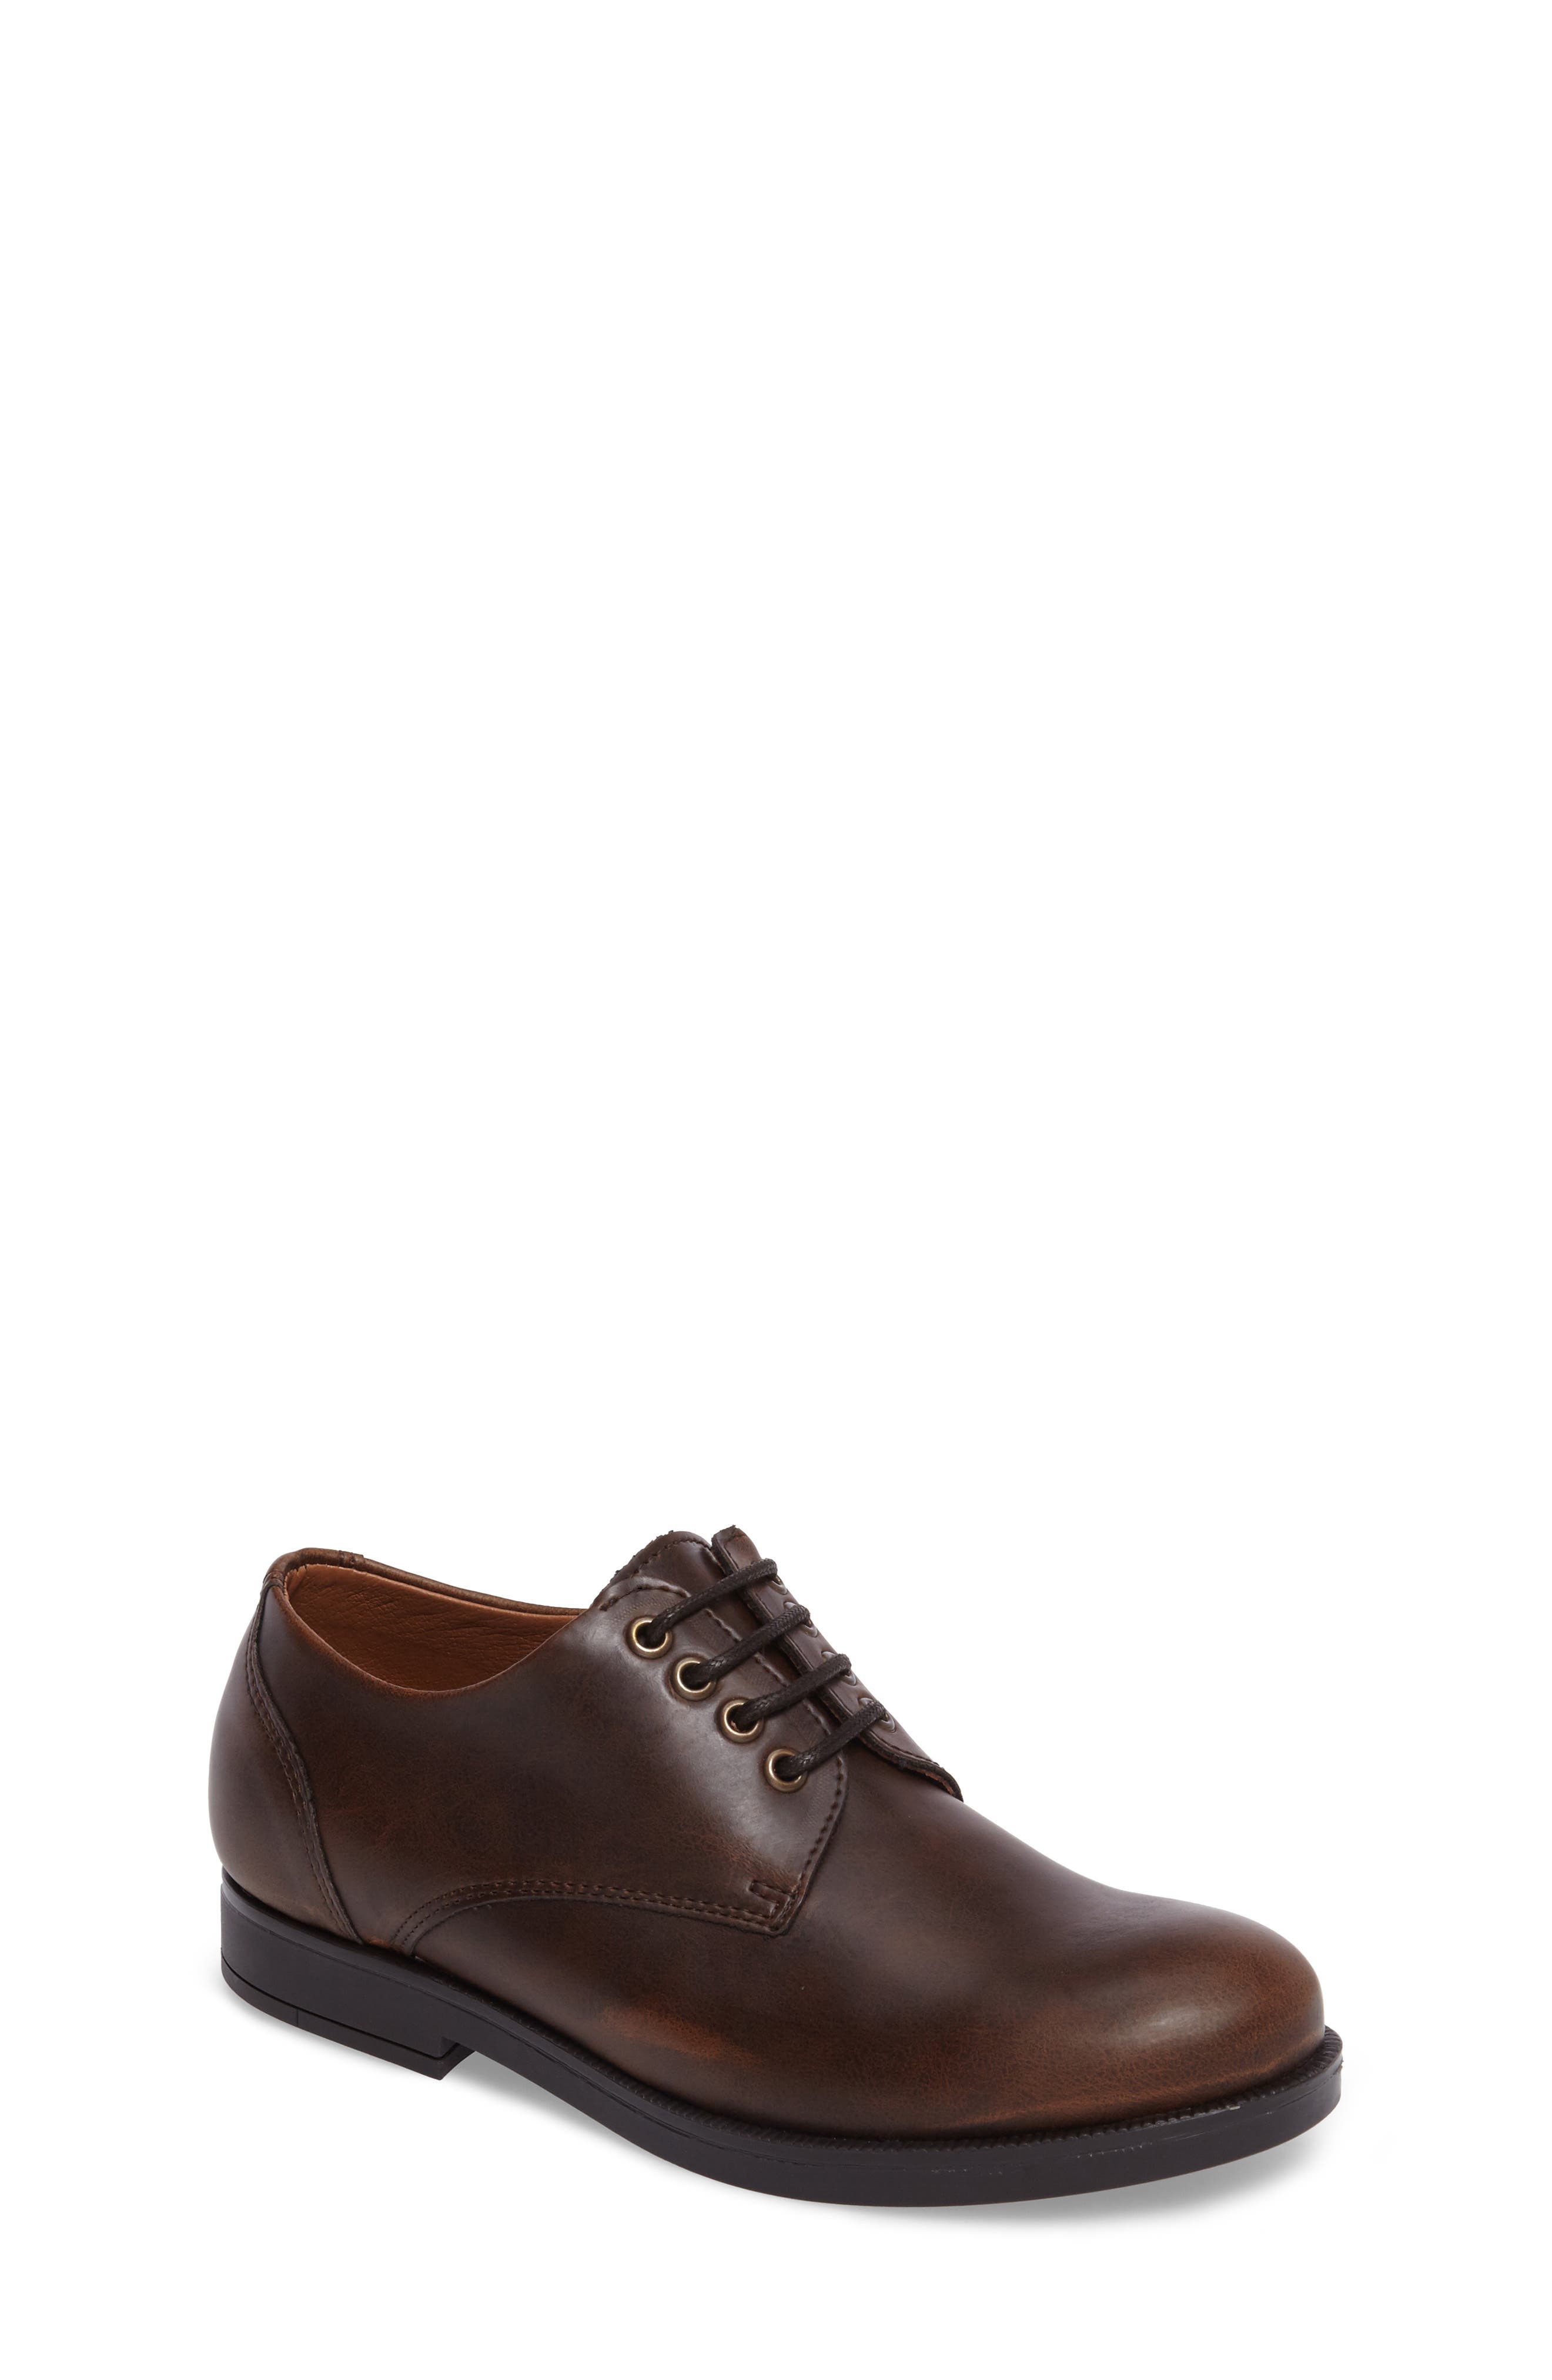 UPC 190937165863 product image for Boy's Vince Camuto Kalb Plain Toe Oxford, Size 1.5 M - Brown | upcitemdb.com